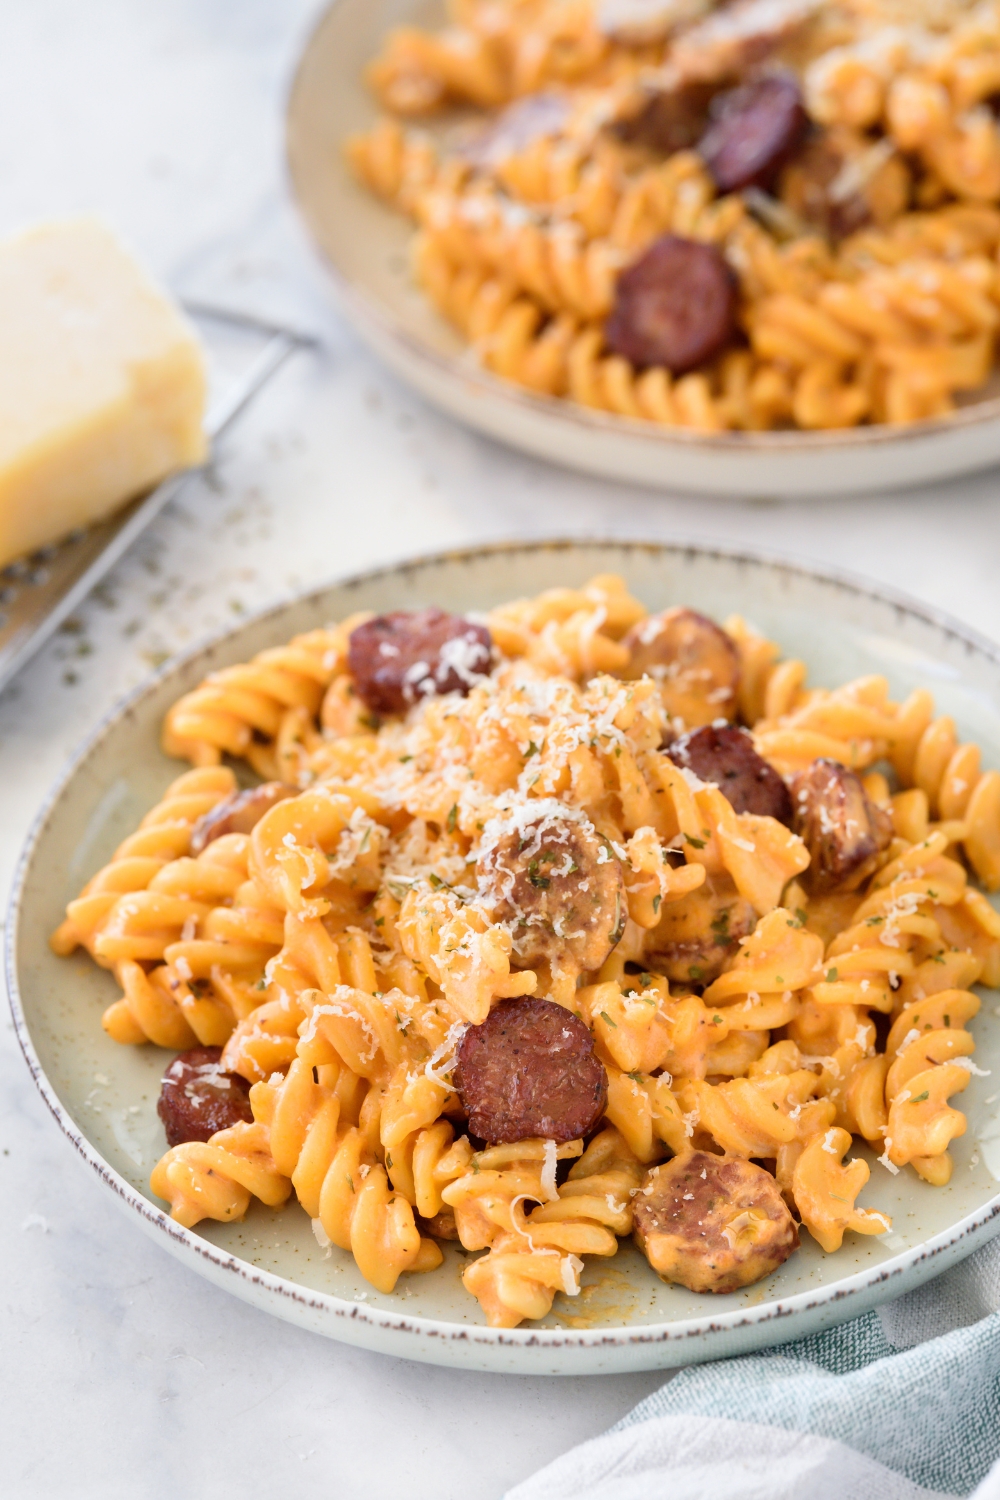 A plate of pasta covered in creamy red sauce with sausage slices mixed in the pasta and cheese on top.